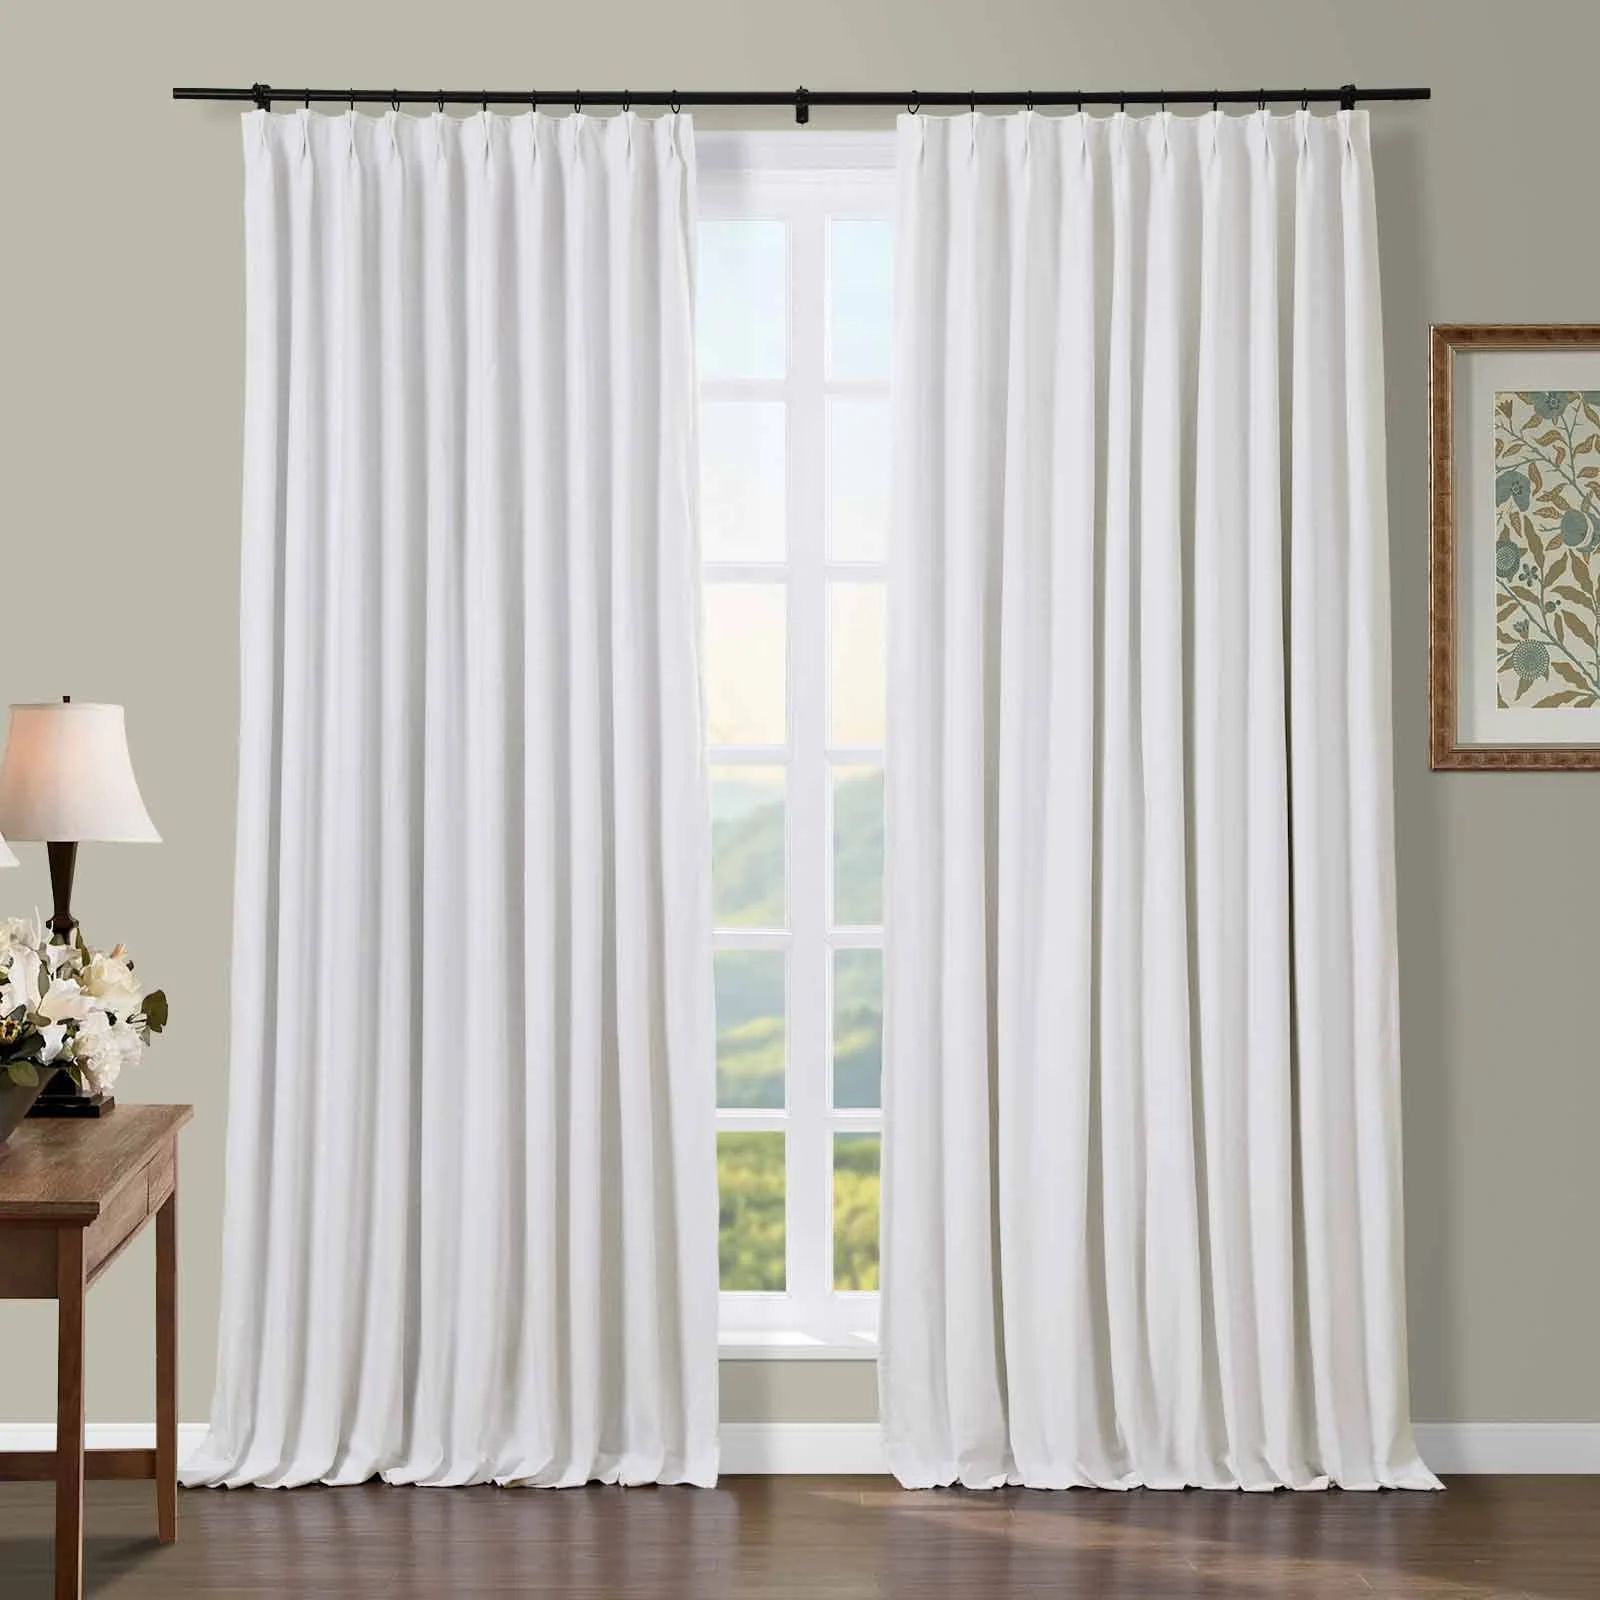 Broad 100% Cotton Plain Weave Curtain Pleated | TWOPAGES